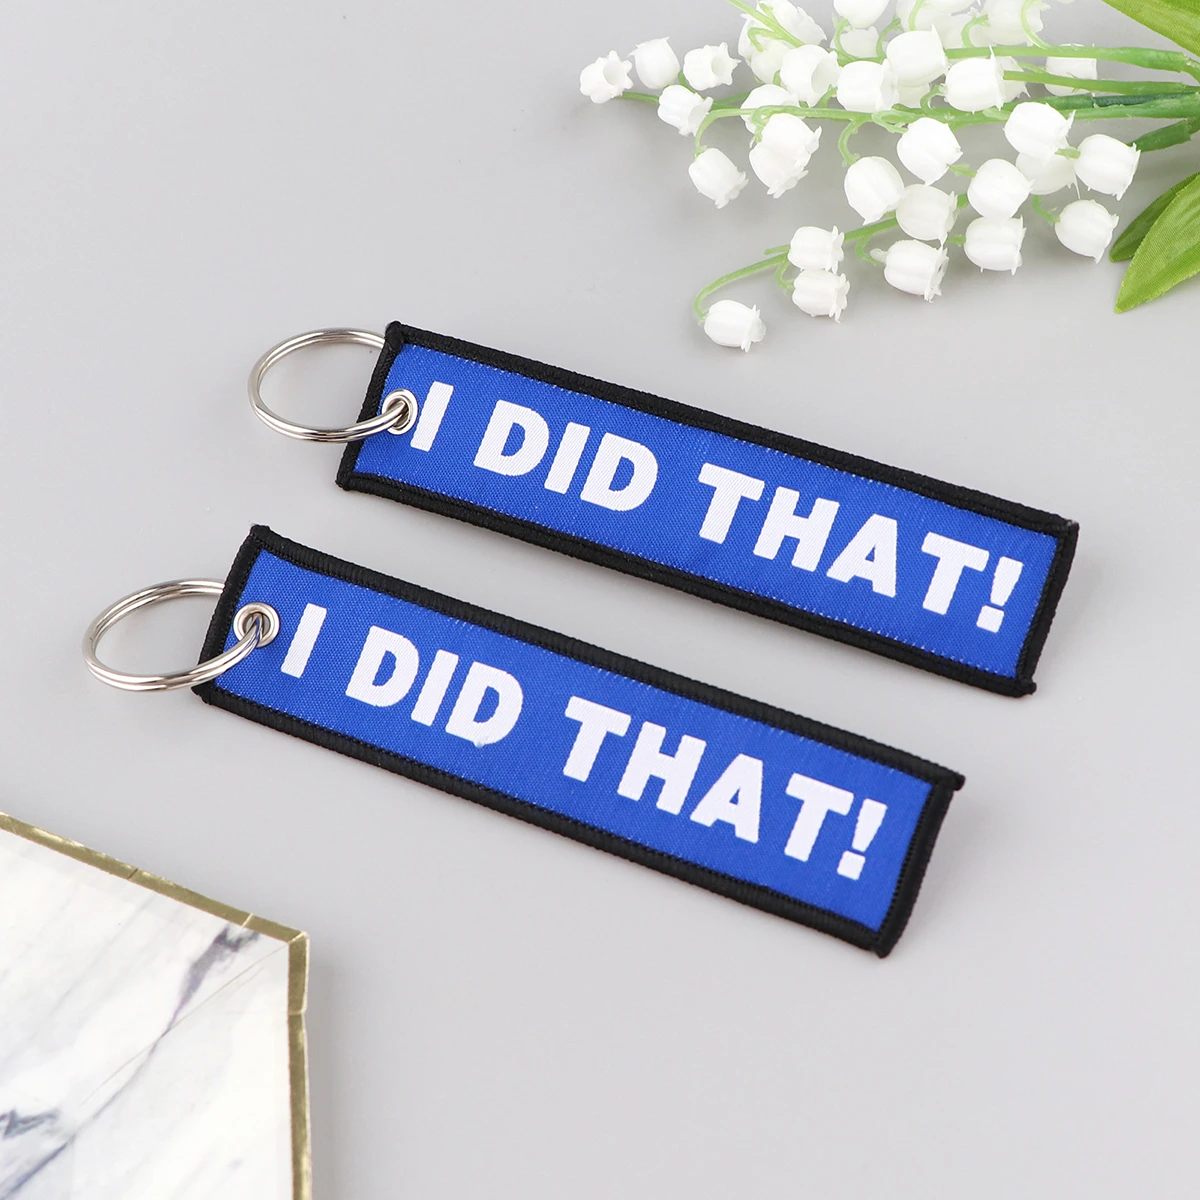 Funny Quotes New Fashion Key Chain For Motorcycles And Cars Gifts Tag  Embroidery Key Fob Holder Keychain Keyring Jewelry - Key Chains - AliExpress